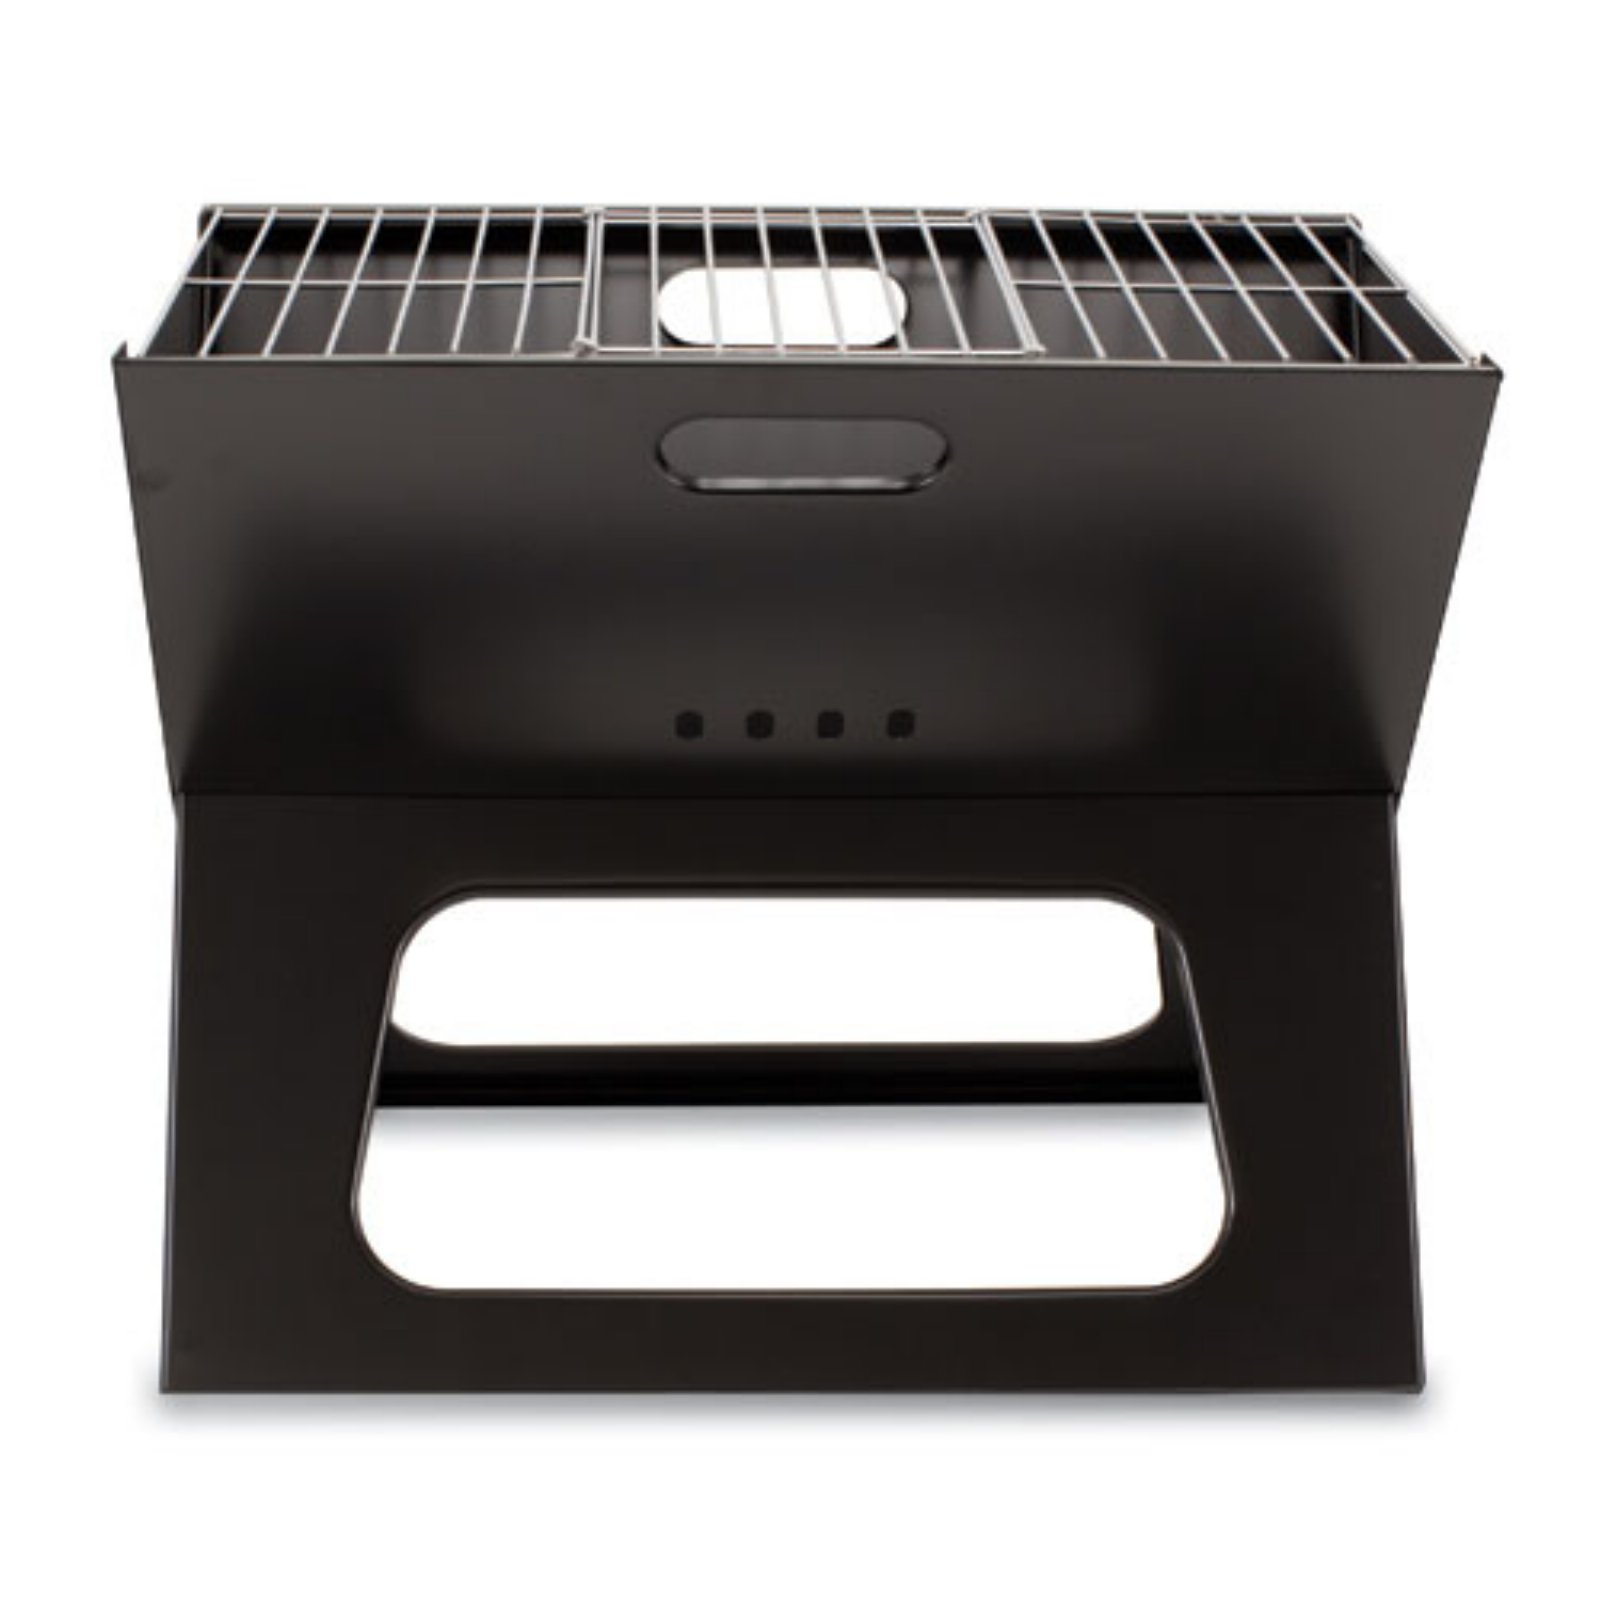 X Grill Compact Portable Charcoal Grill - image 2 of 7